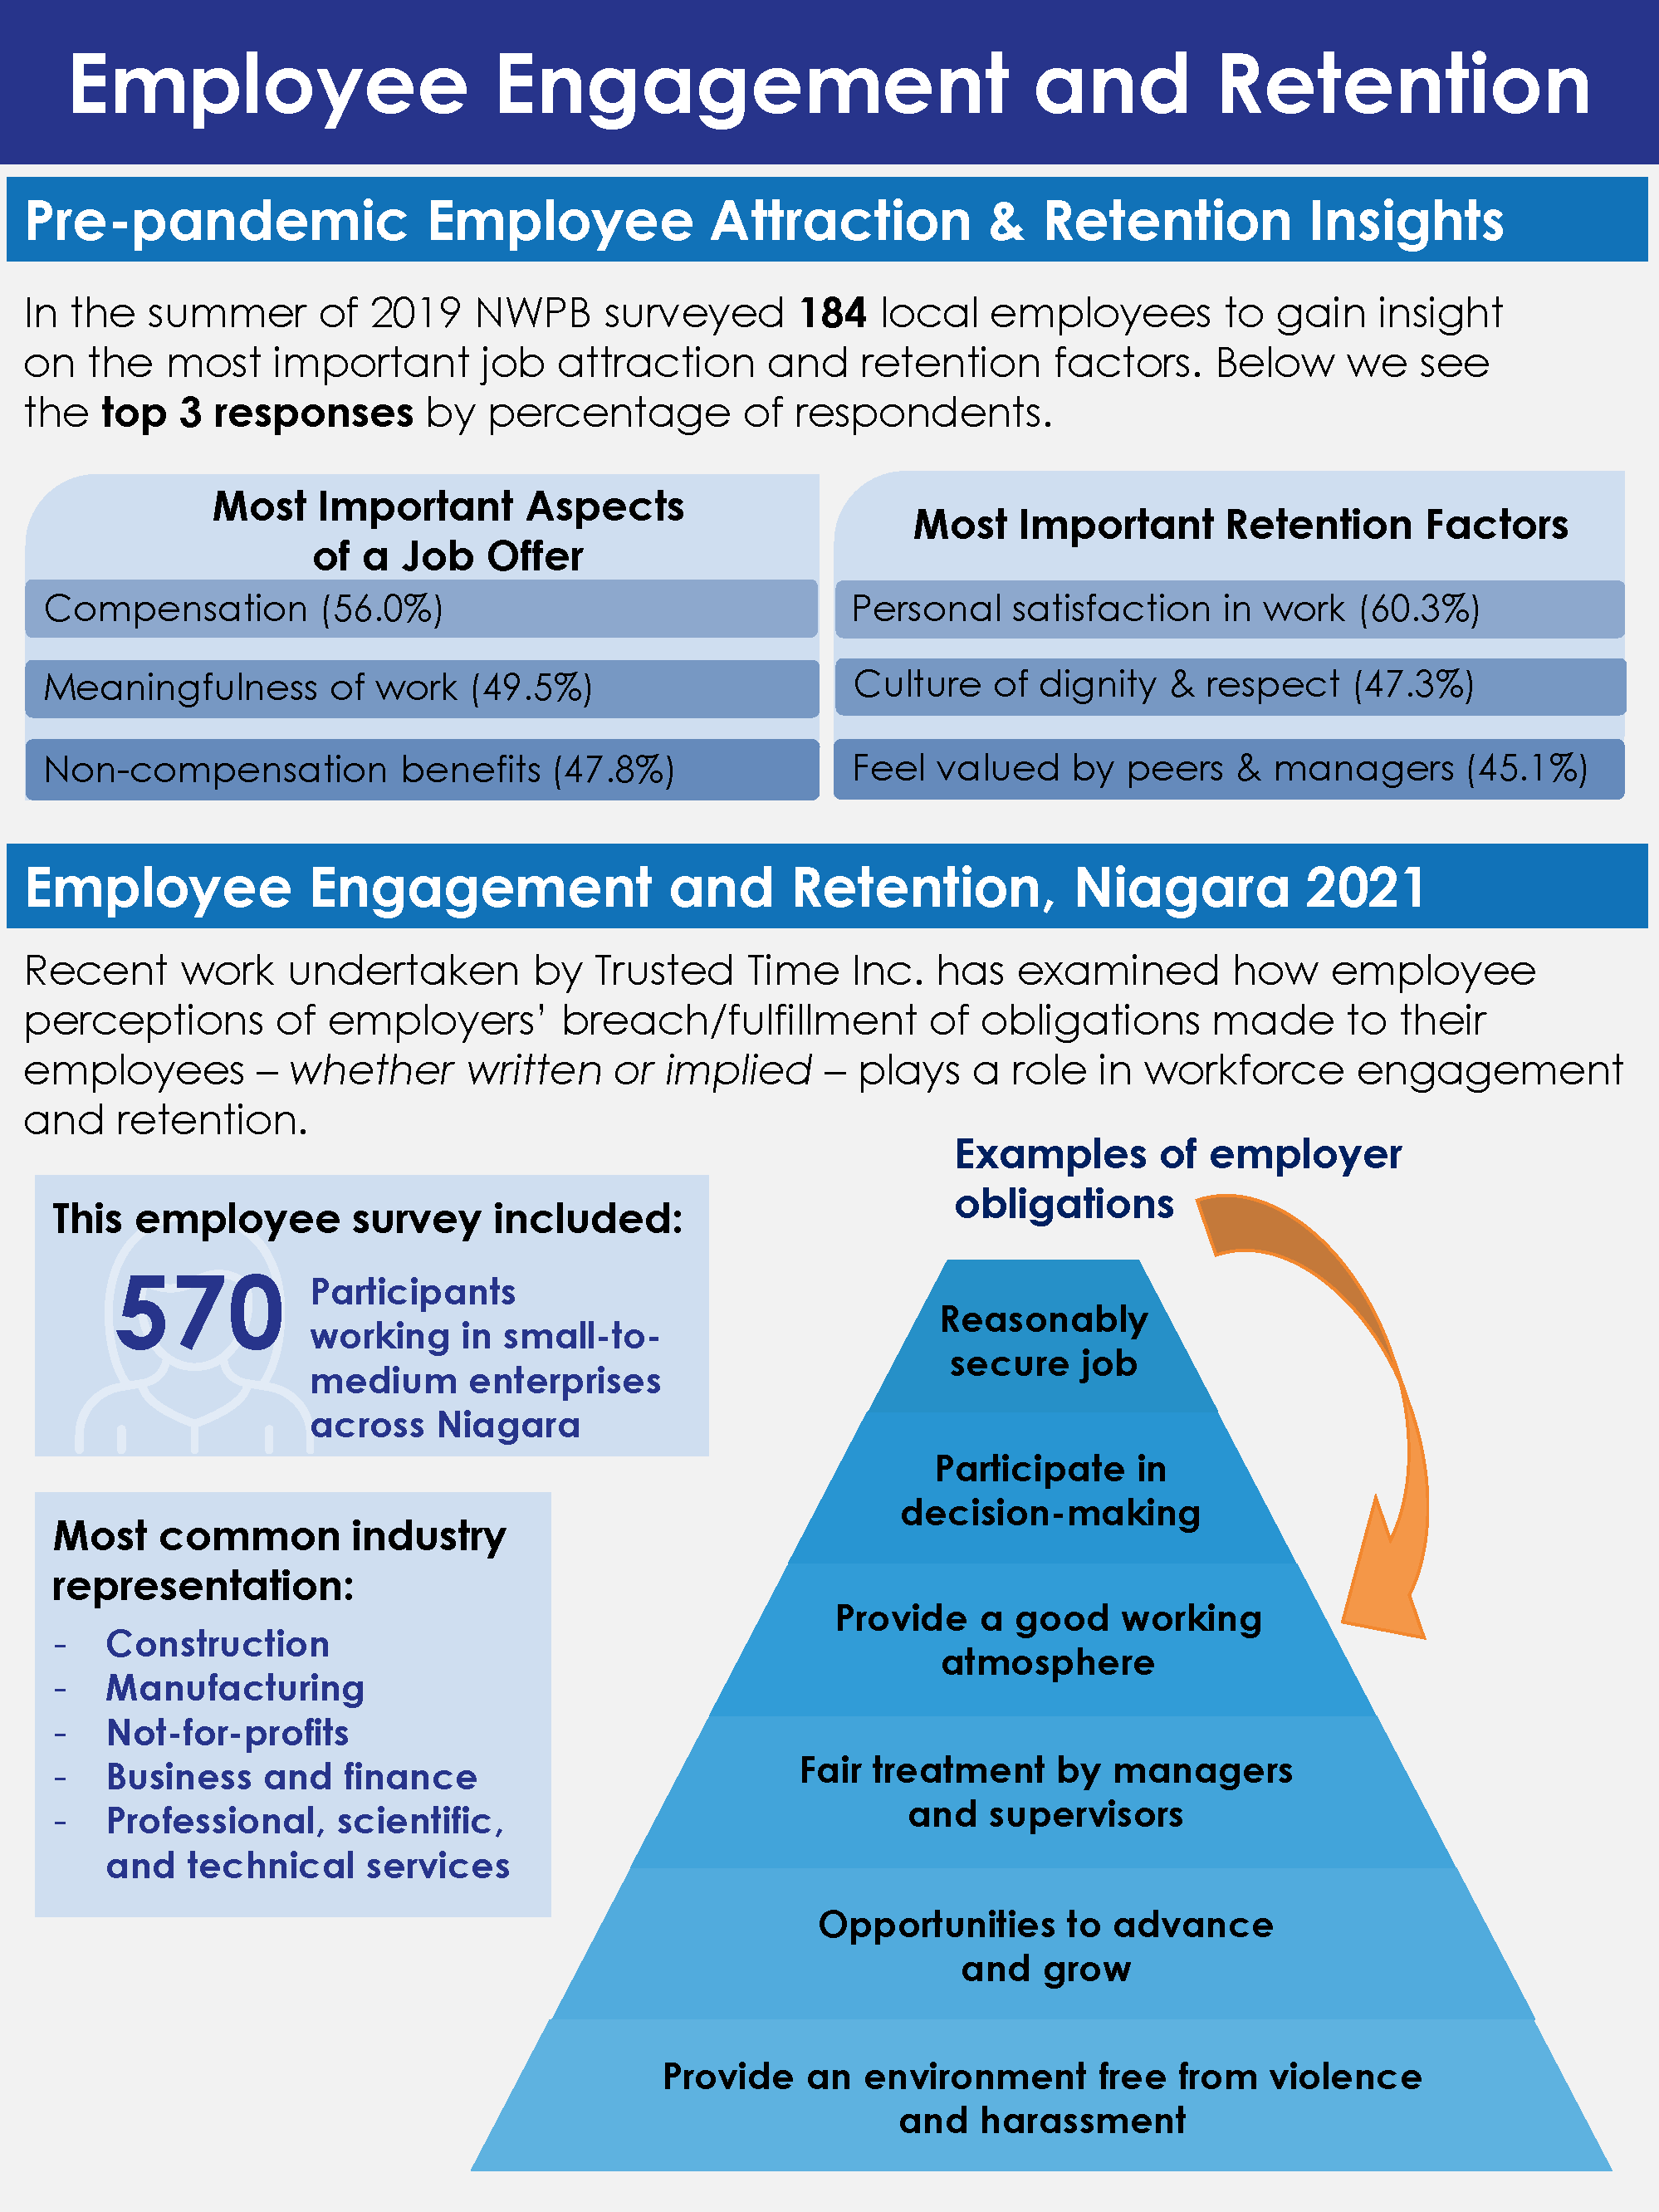 2021 Employee Engagement and Retention - Part 1 infographic